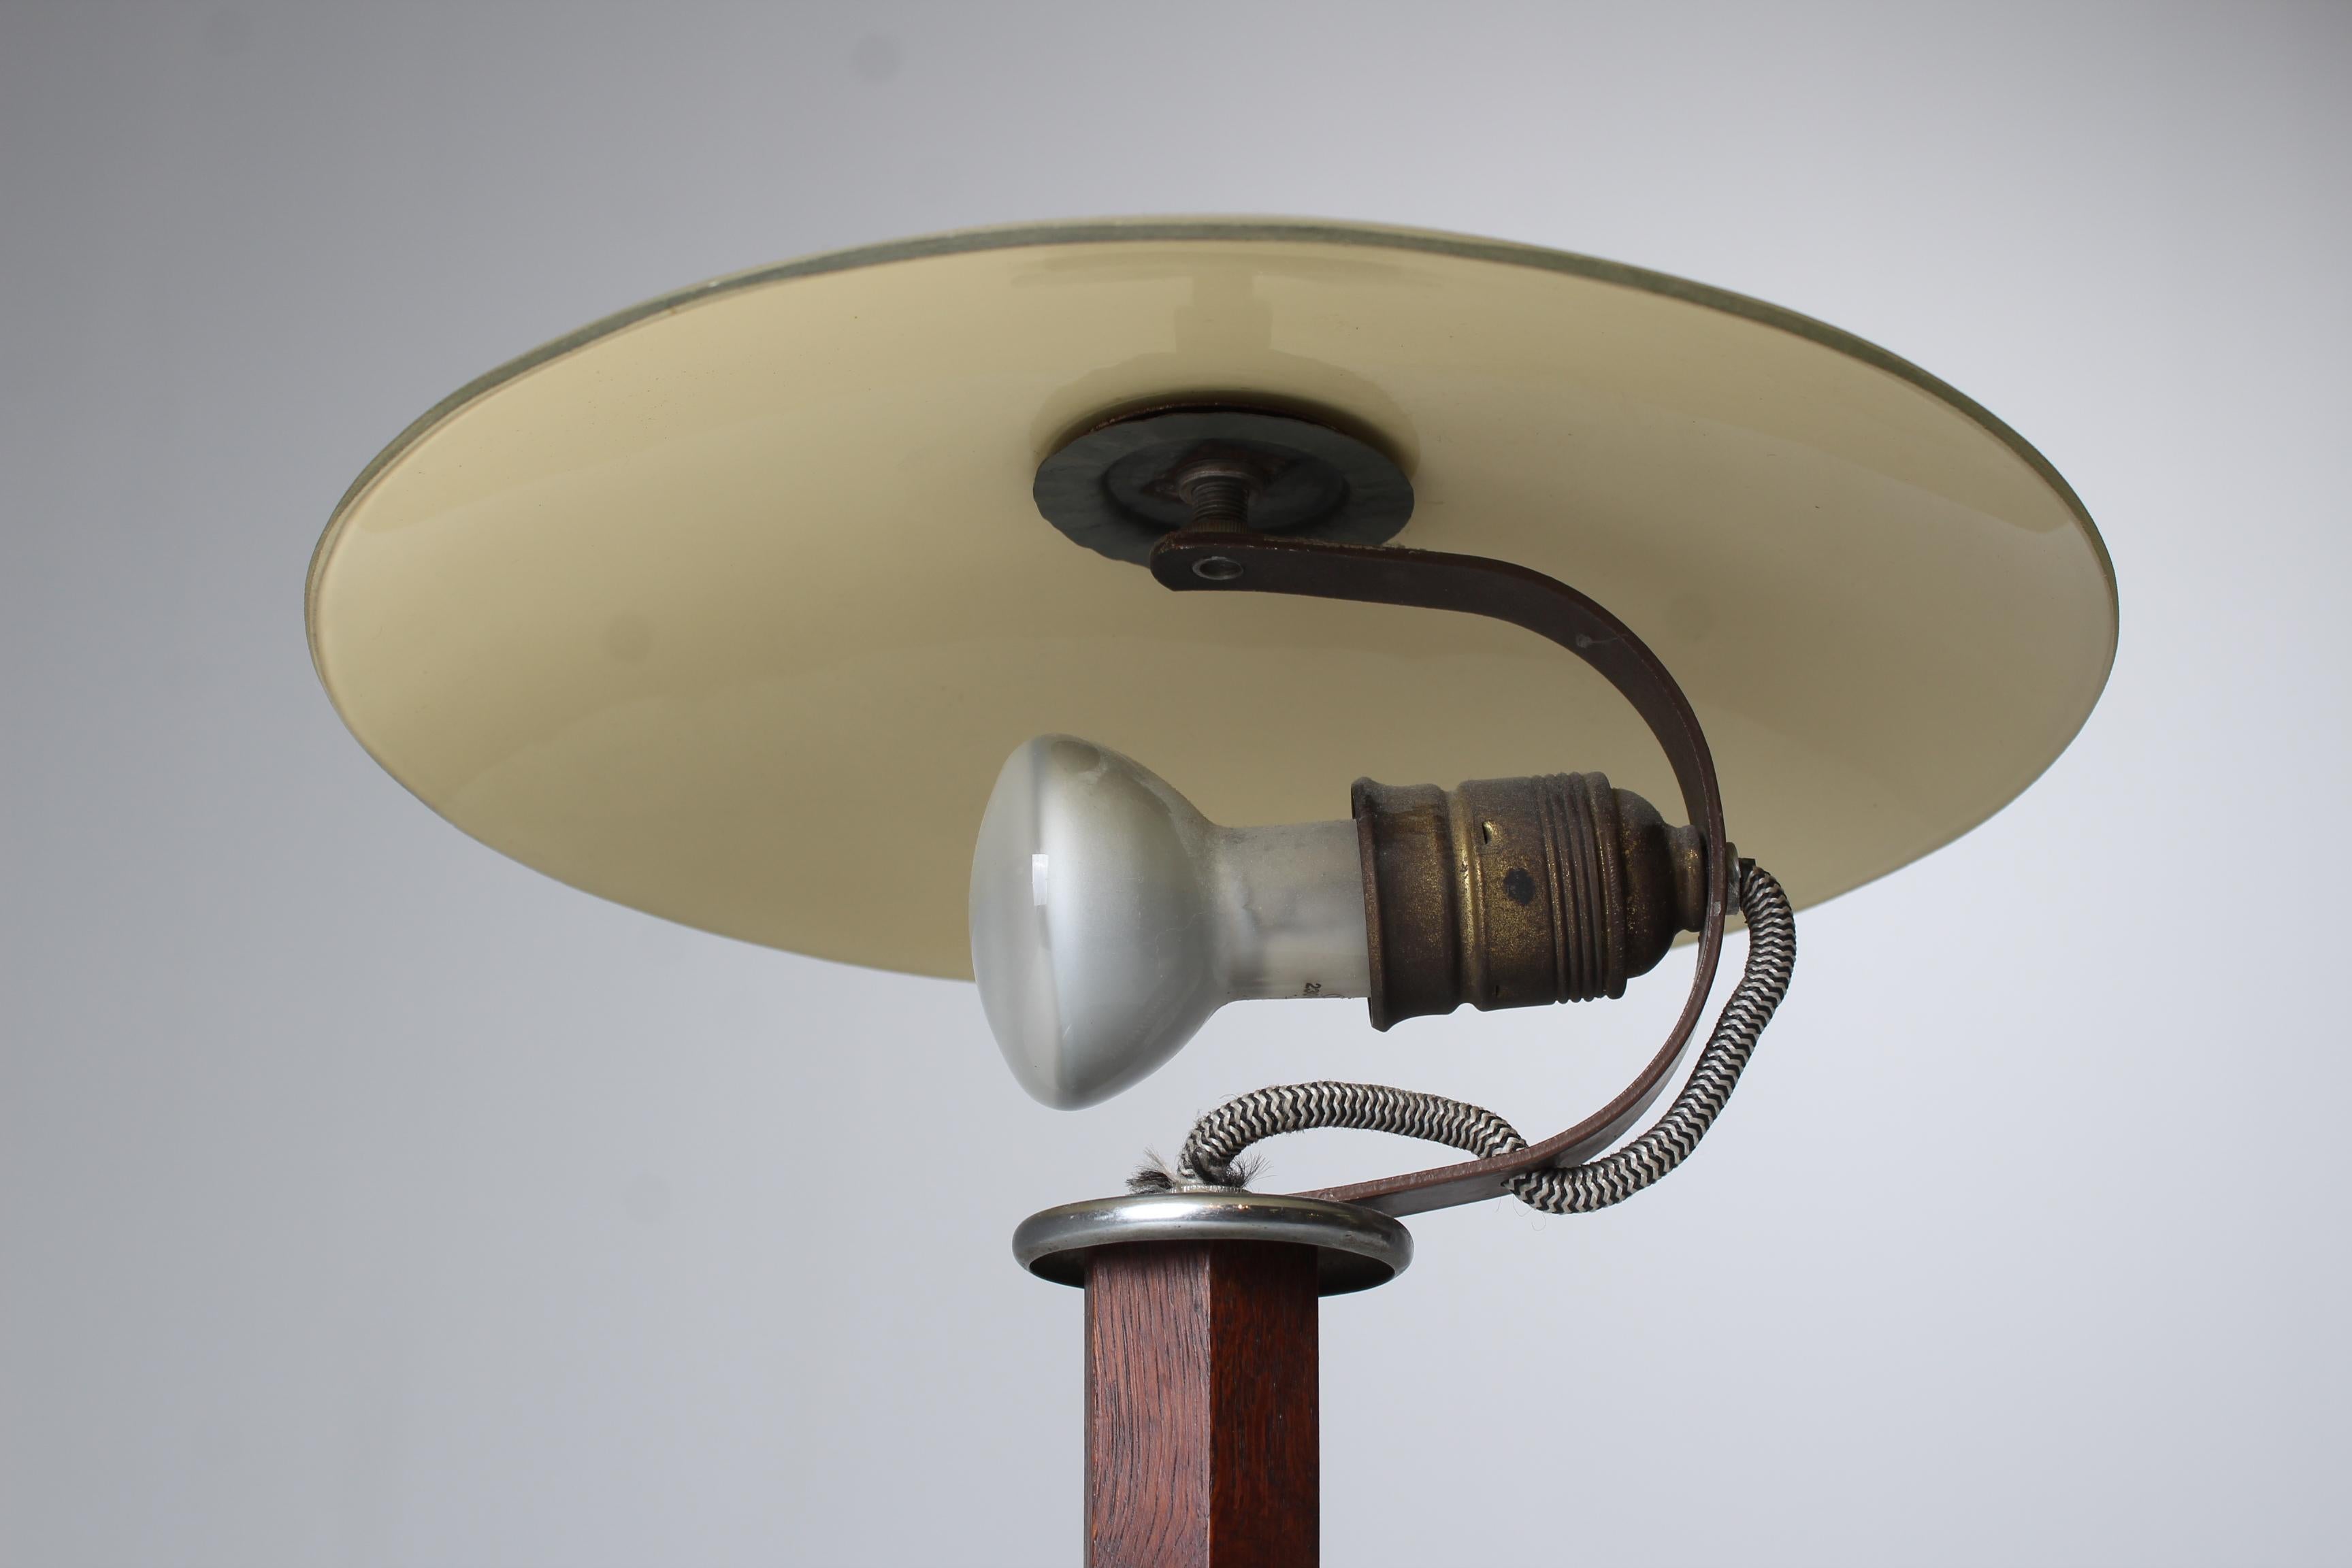 Metal Art Deco Table Lamp, France, 1920s - 1930s For Sale